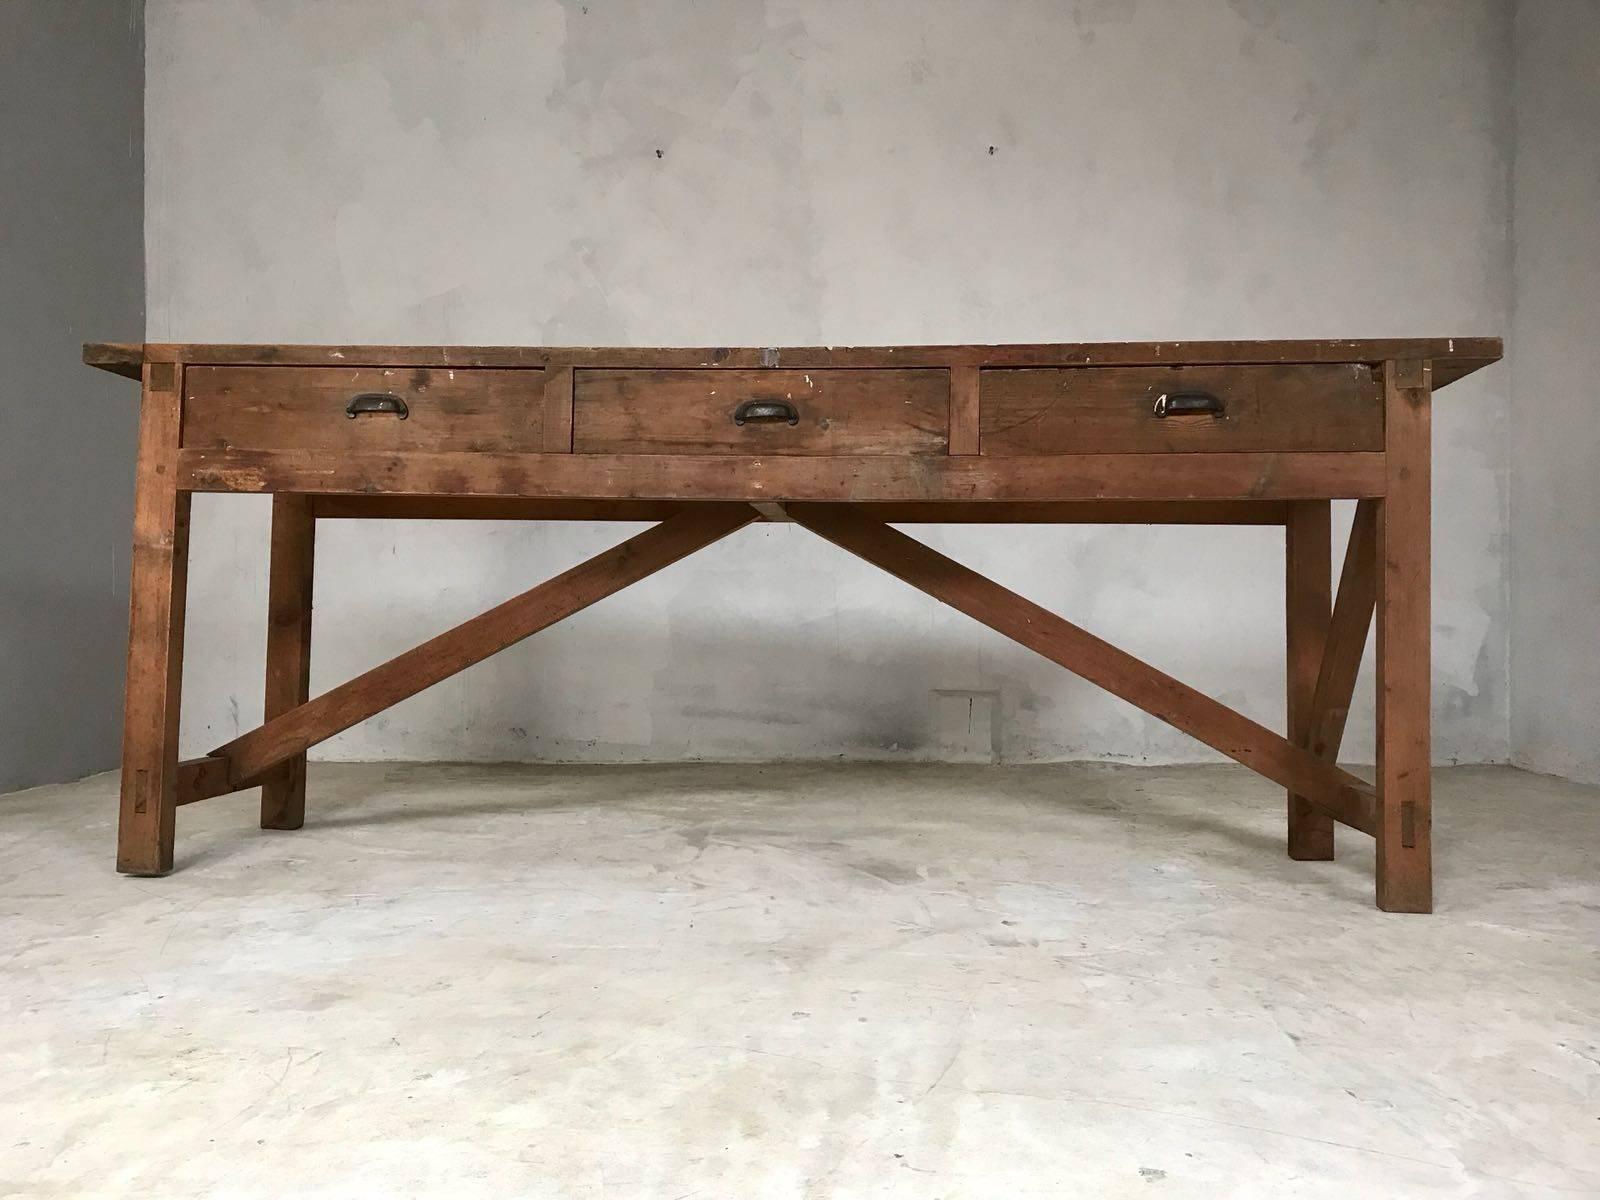 Great looking English pine workbench with three drawers and original black cast iron handles. It features an unusual and attractive base with cross bars below. This workbench was found in an old carpenter's workshop in the west of England and has